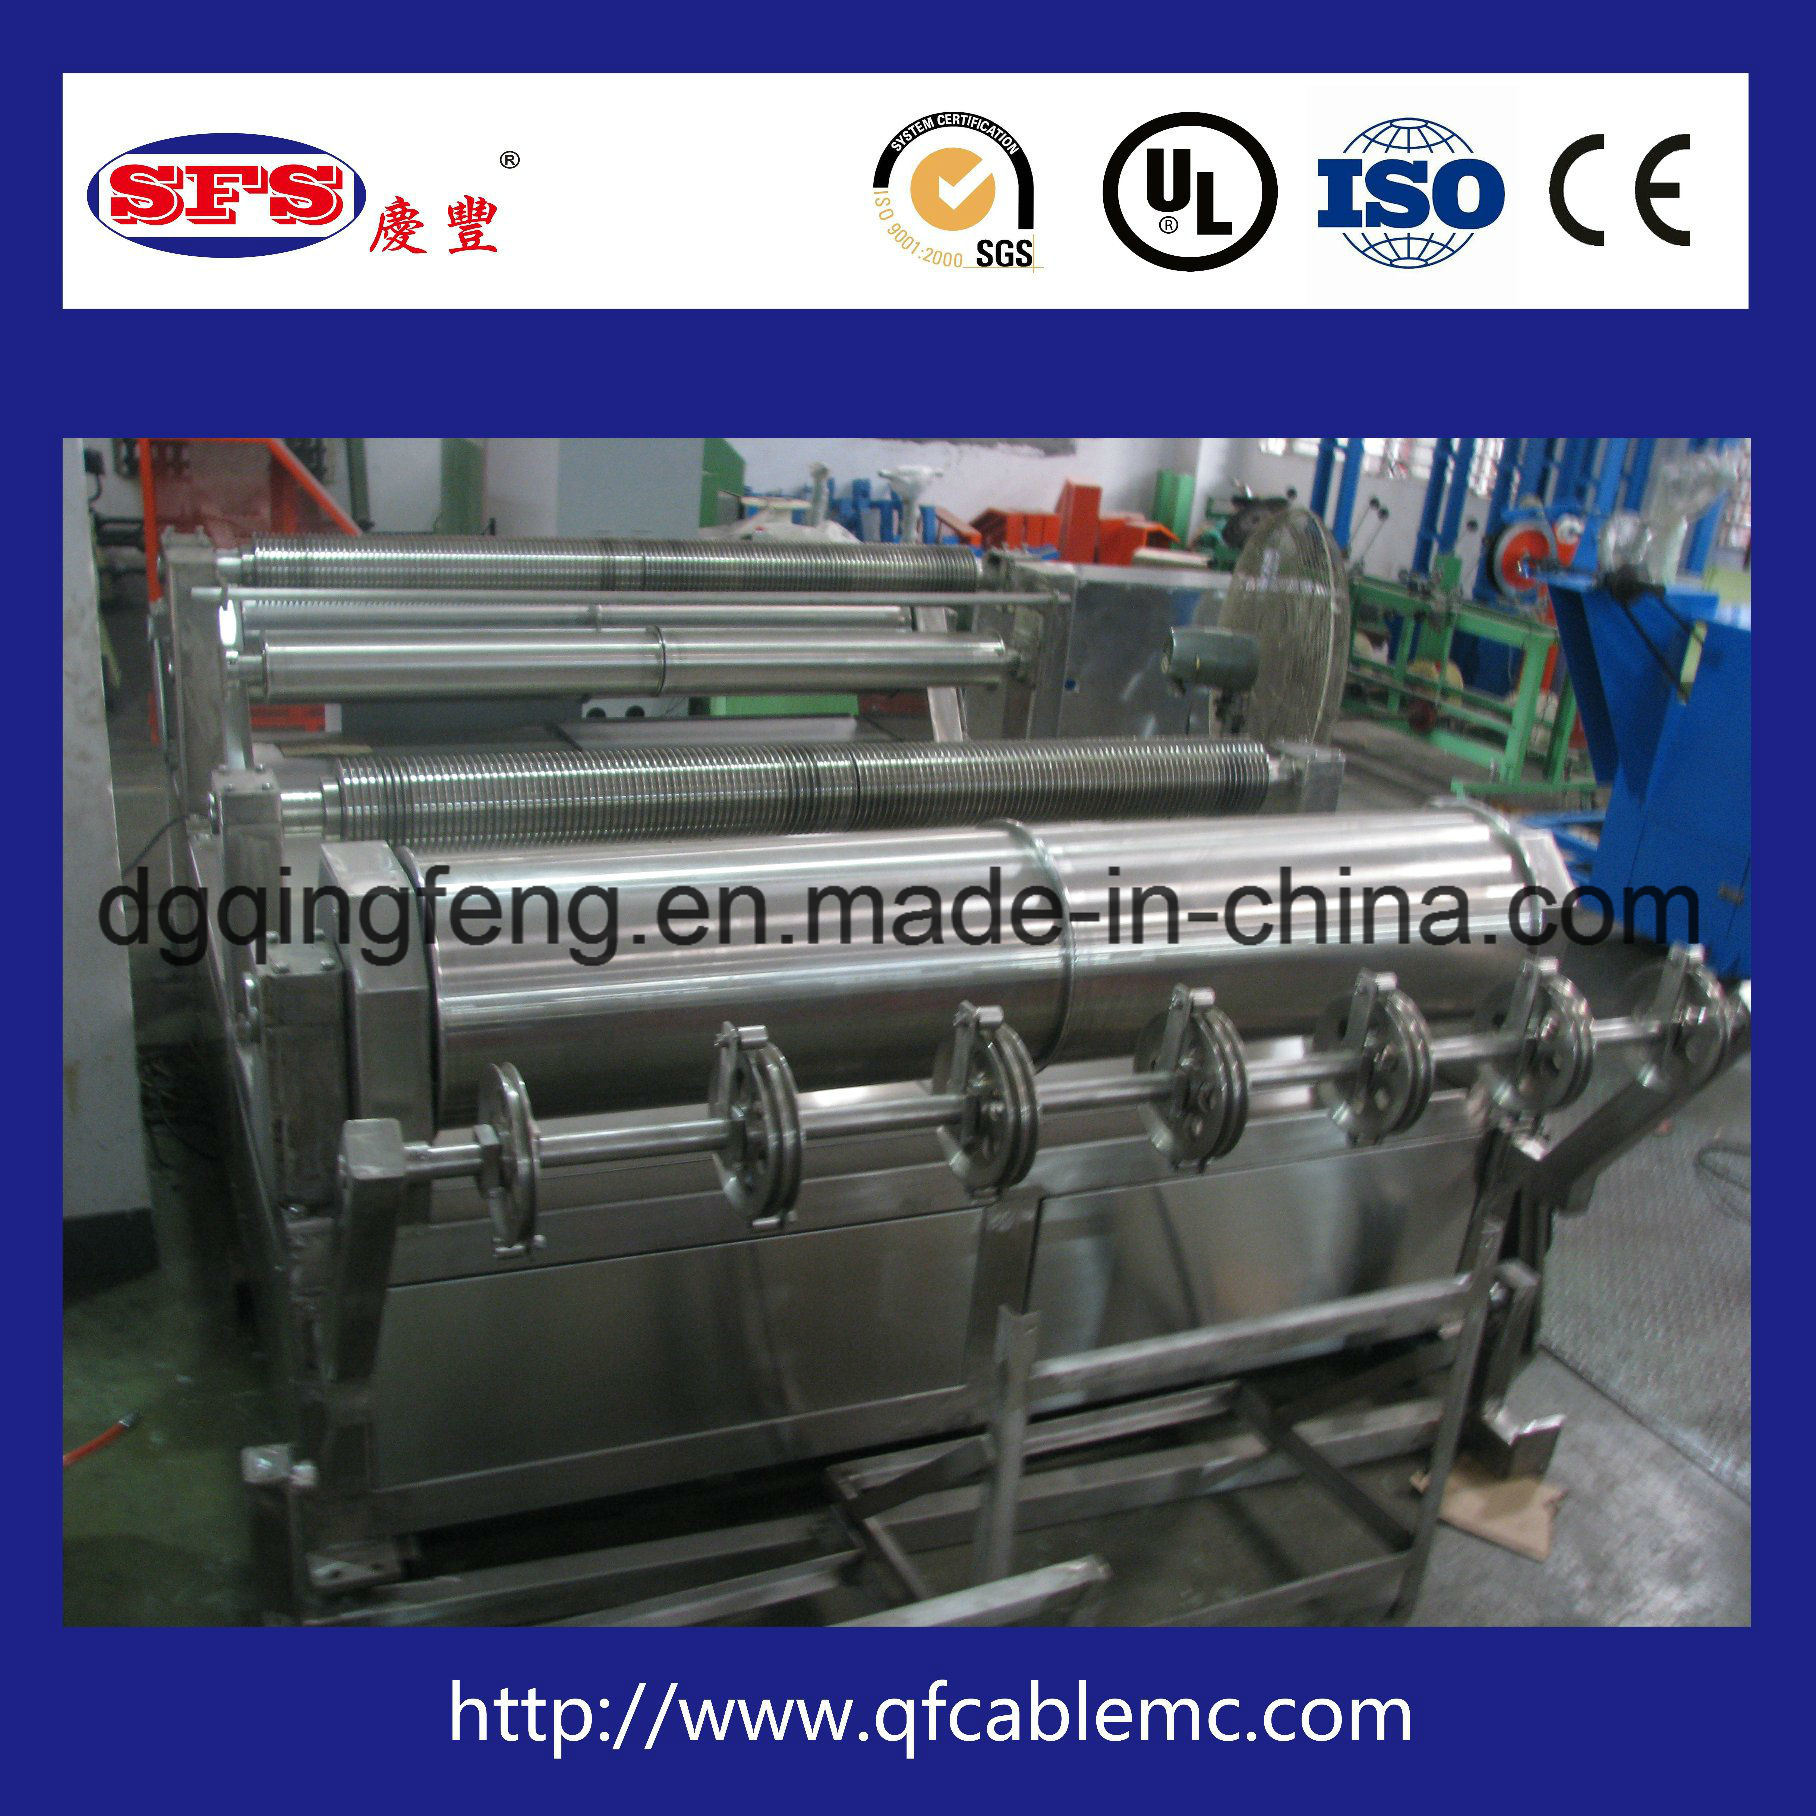 High Speed Wire and Cable Irradiation Machinery Processing for Finger Cot, Sealing Cap, Umbrella Skirt